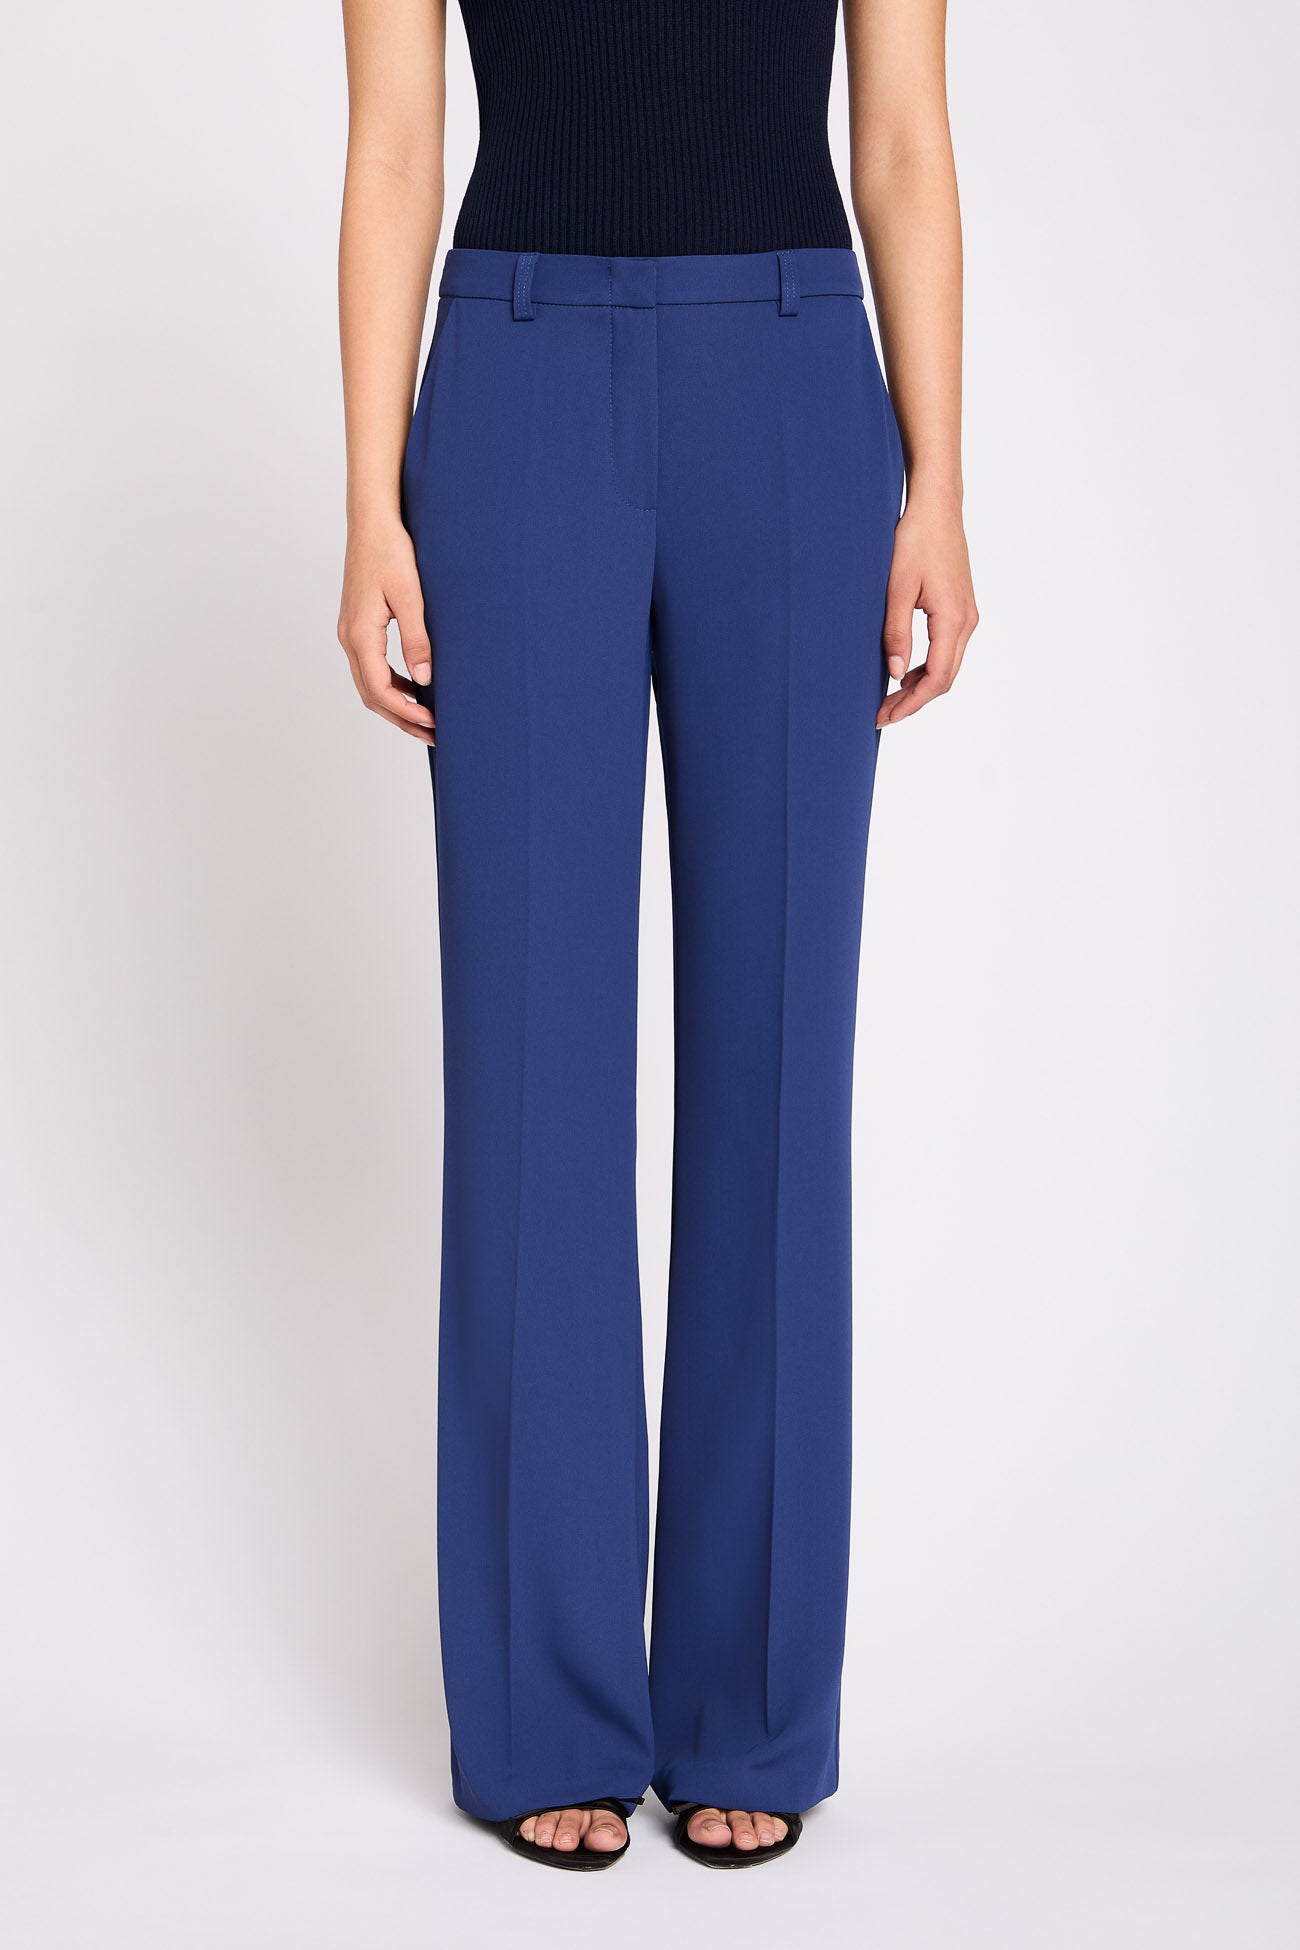 Trousers in fluid fabric